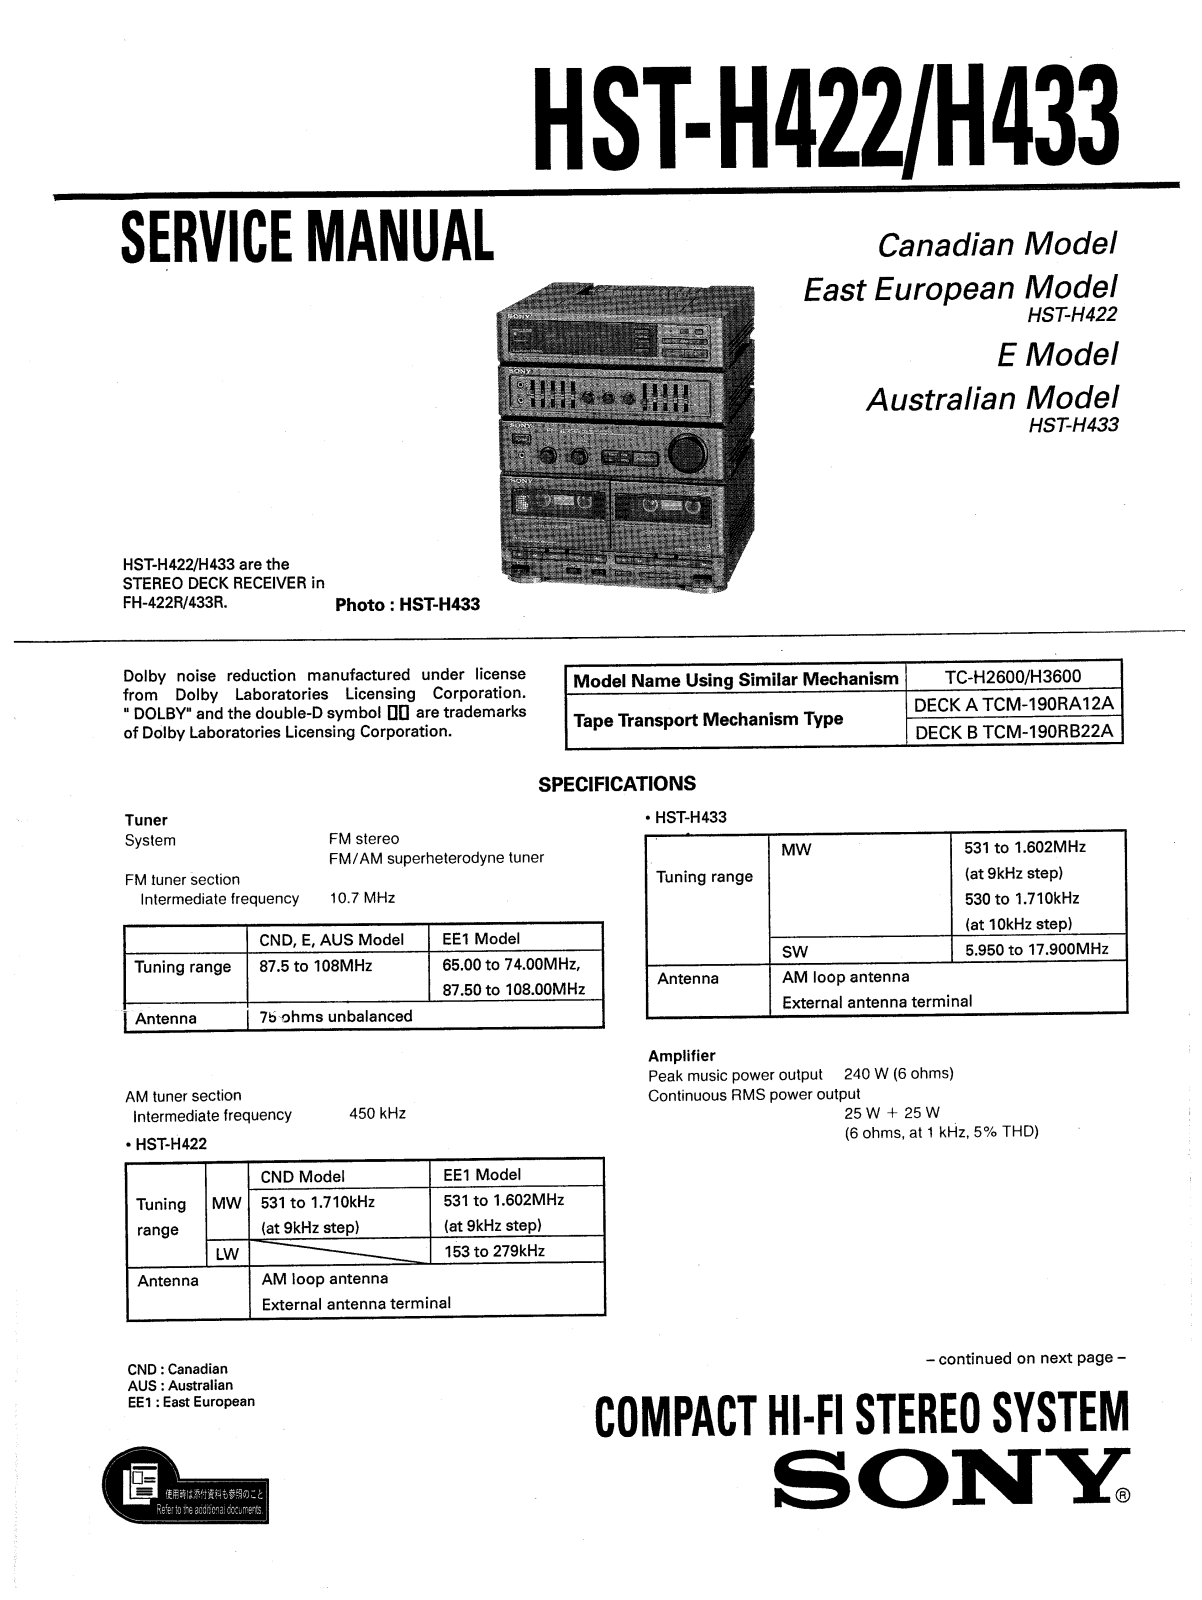 Sony HSTH-433 Service manual